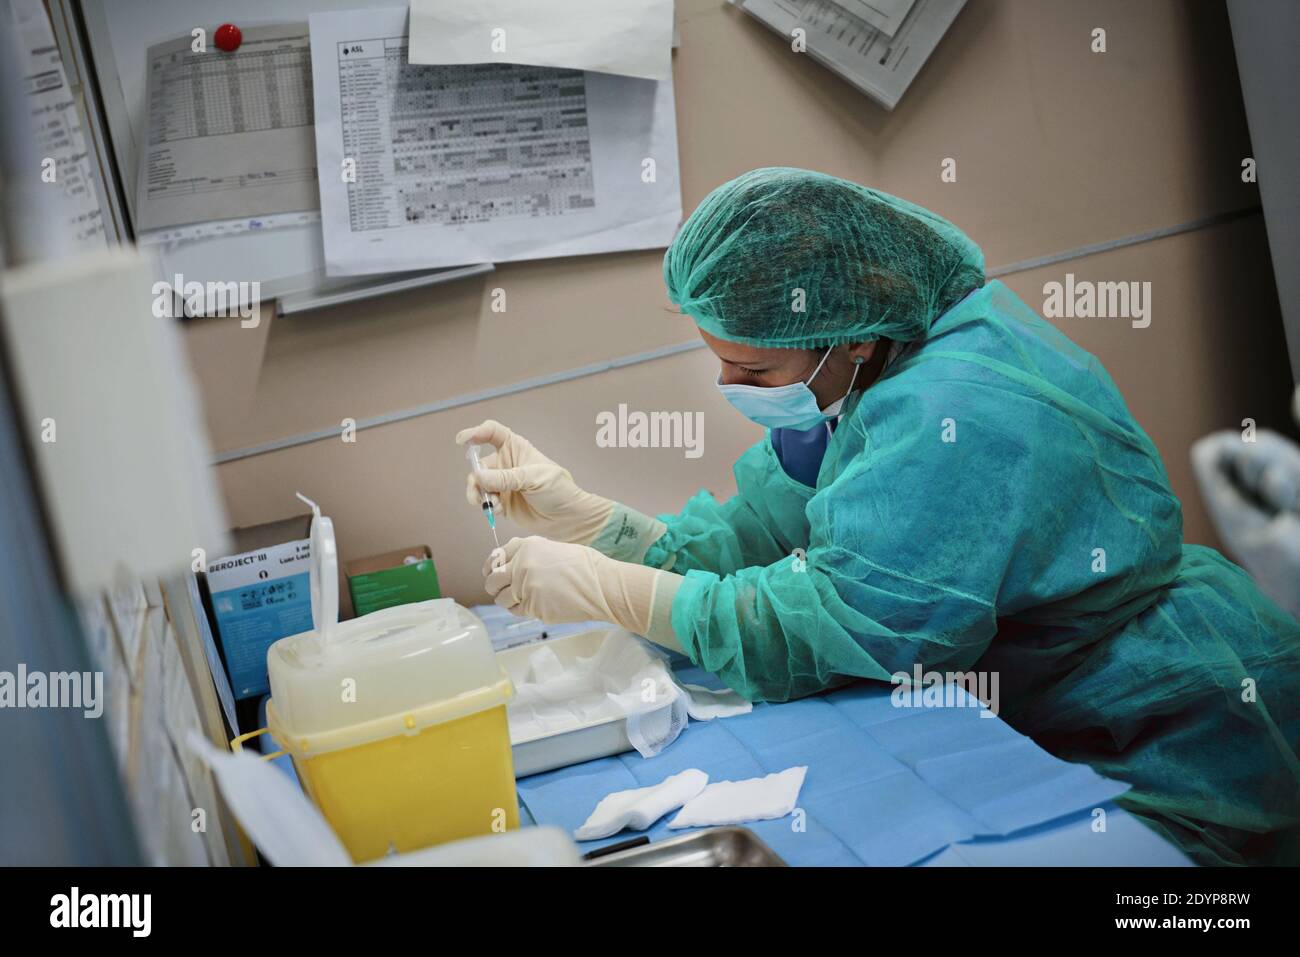 Health workers at work during the first day of the vaccination campaign against COVID 19 at the Amedeo di Savoia Hospital. Turin, Italy - December 27, Stock Photo